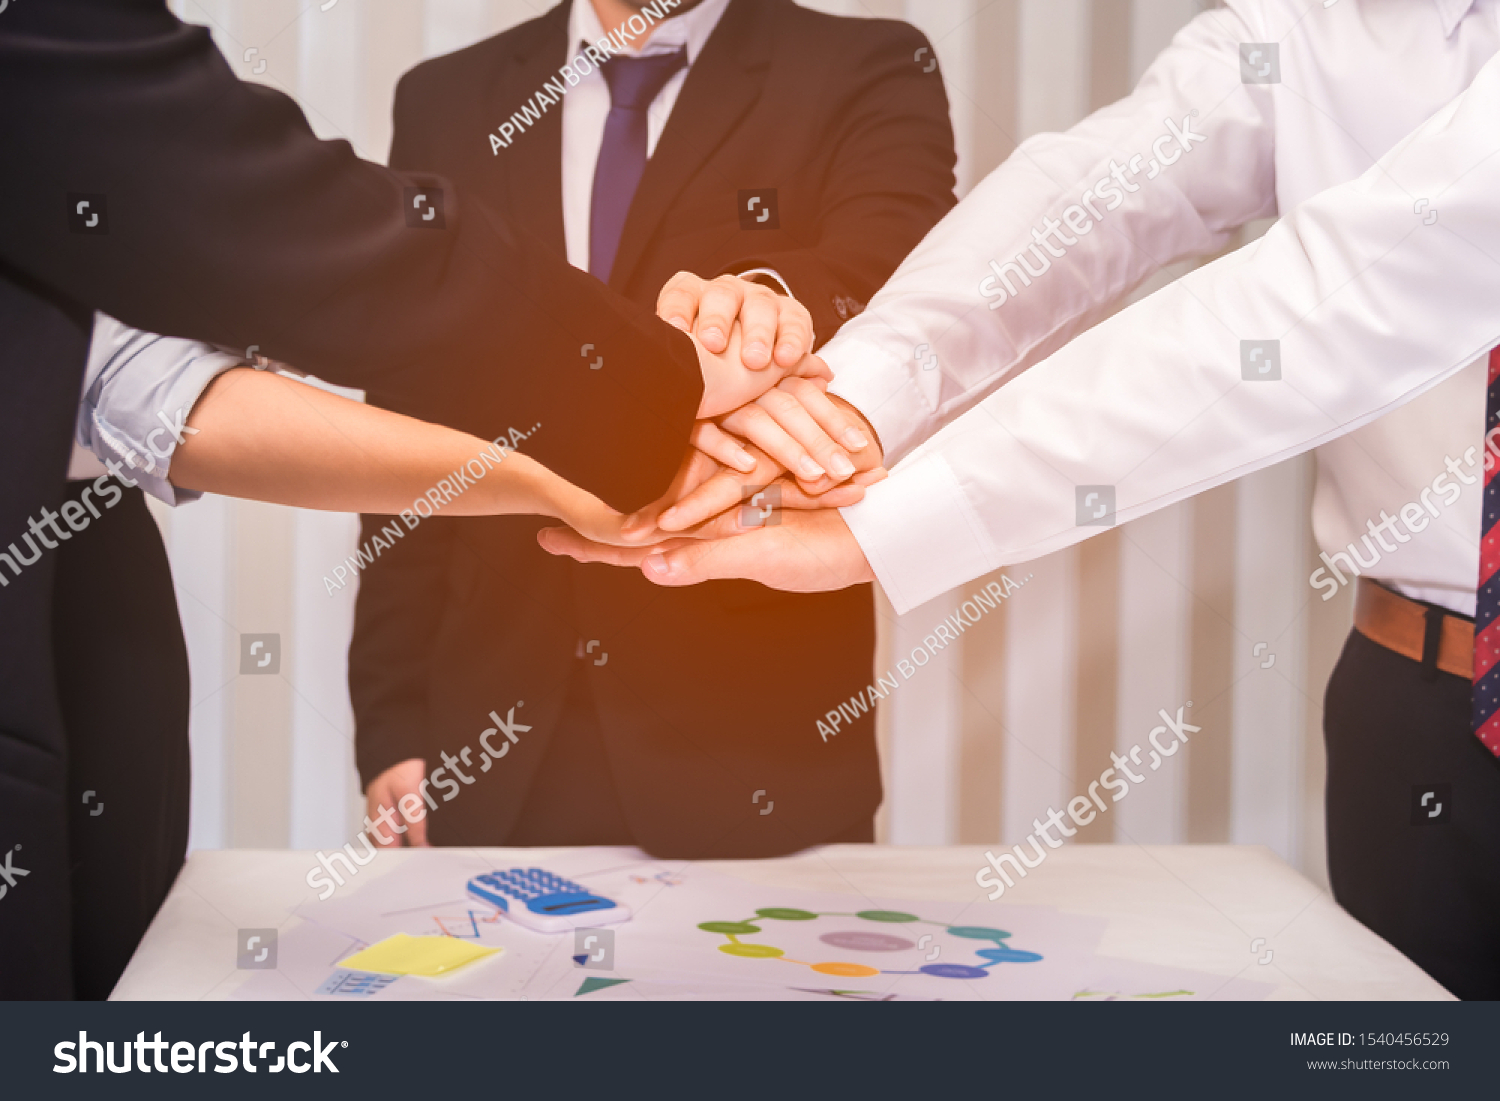 Group of businesspeople putting stacking hands while meeting for showing unity of teamwork. Business and teamwork concept. #1540456529